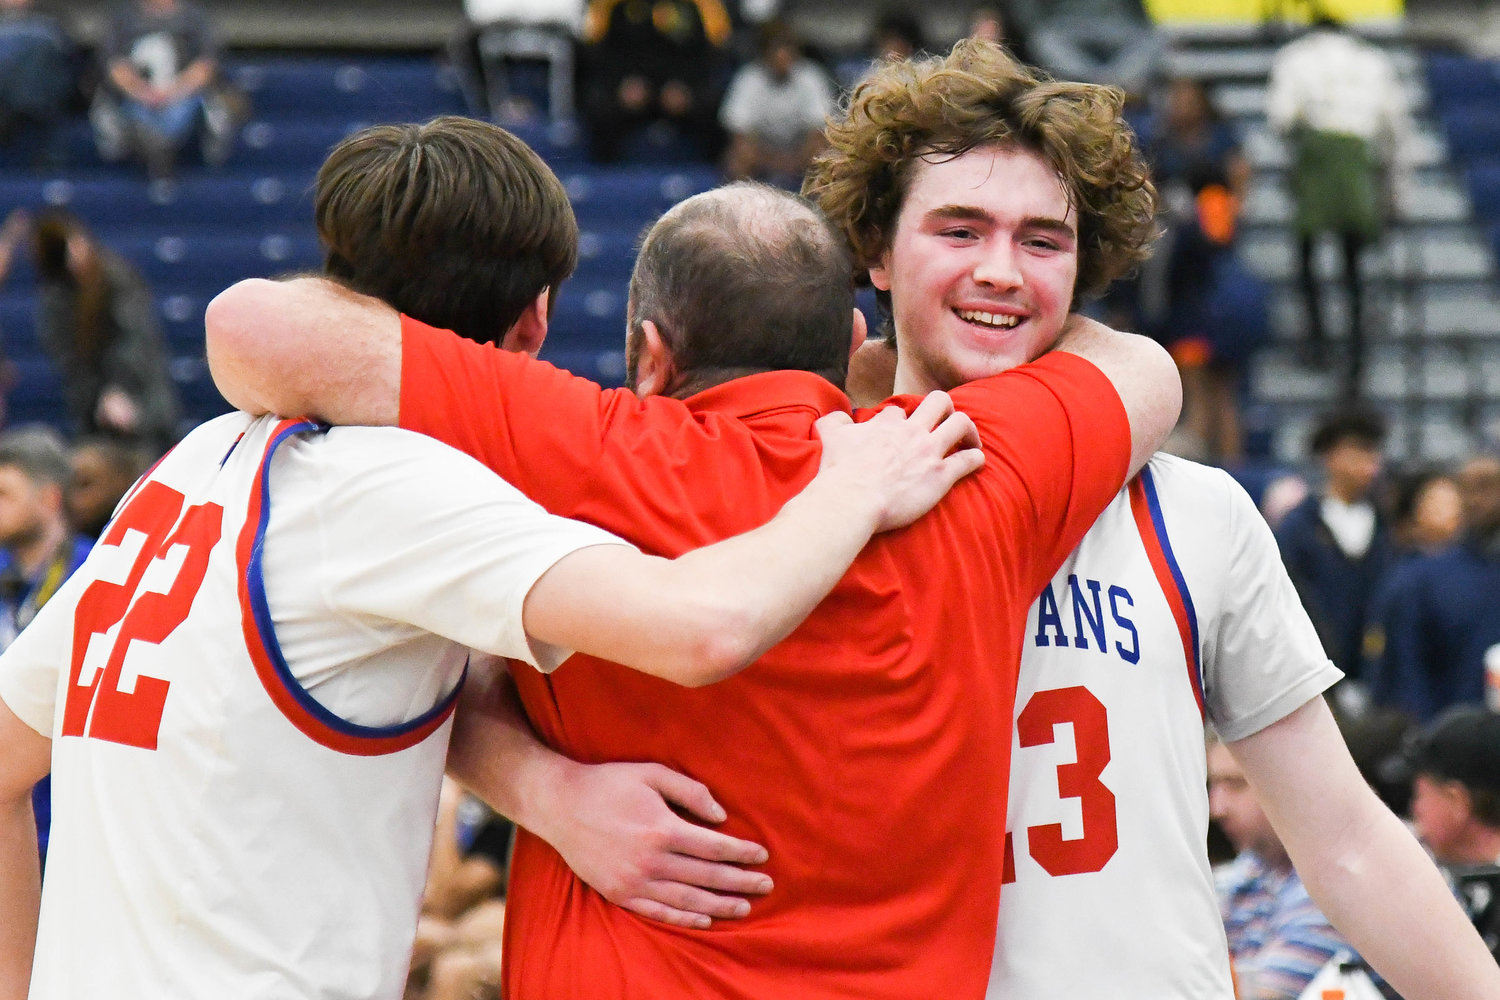 CELEBRATION -- New Hartford players Zach Philipkoski and Colton Suriano hug their coach John Randall after winning the Section III Class A final against Syracuse Academy of Science on Sunday at SRC Arena. Philipkoski was named the Section III Class A Most Valuable Player.